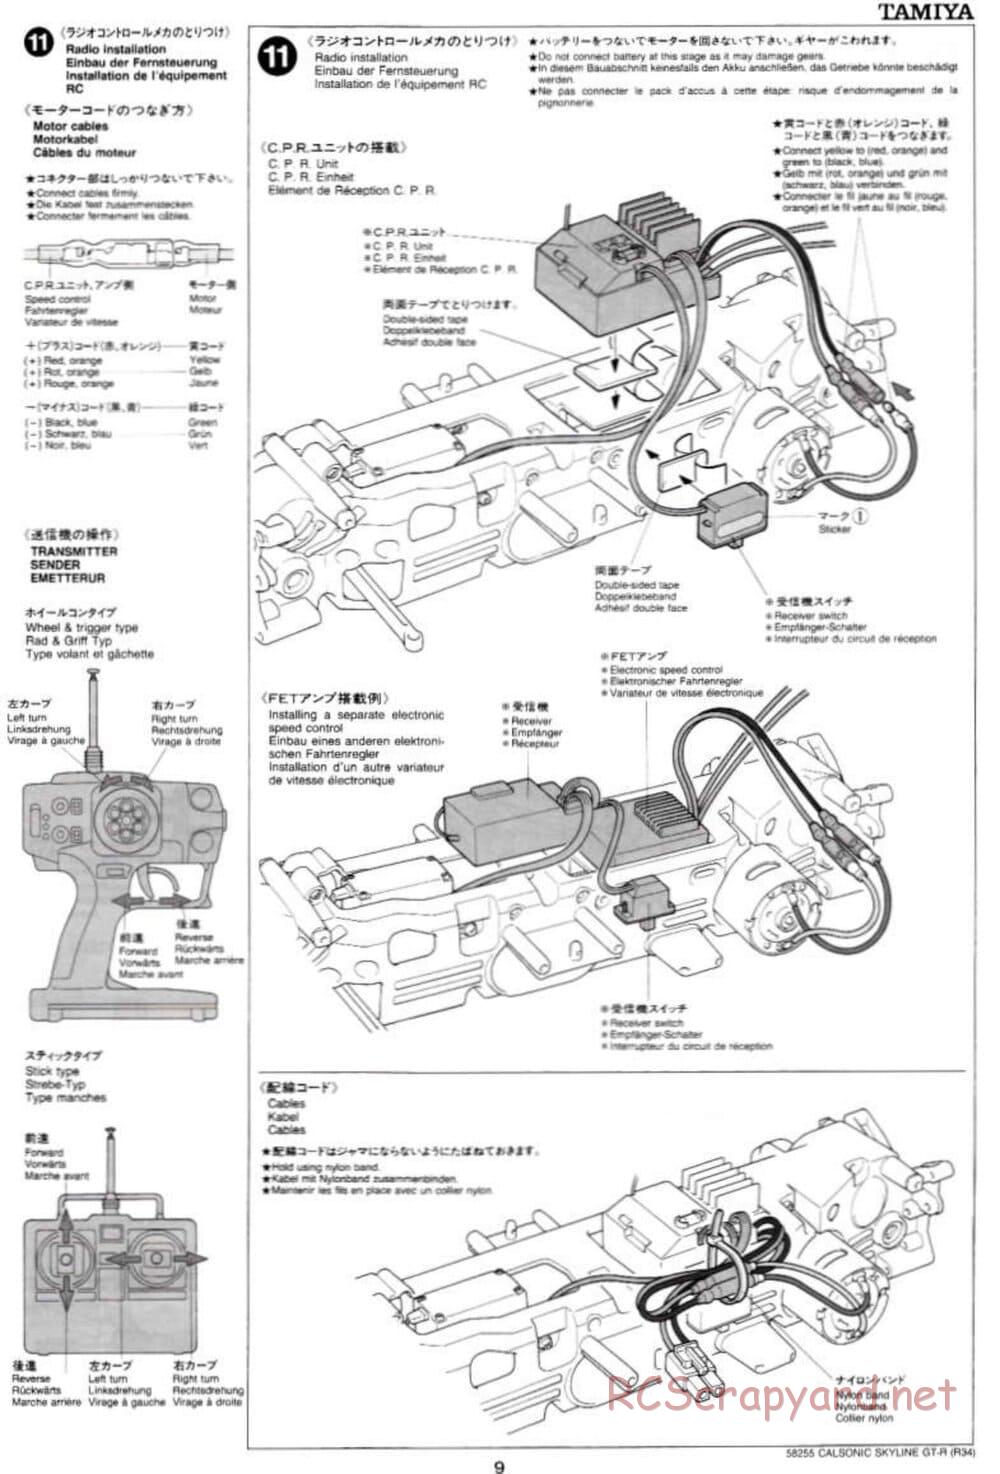 Tamiya - Calsonic Skyline GT-R (R34) - TL-01 Chassis - Manual - Page 9